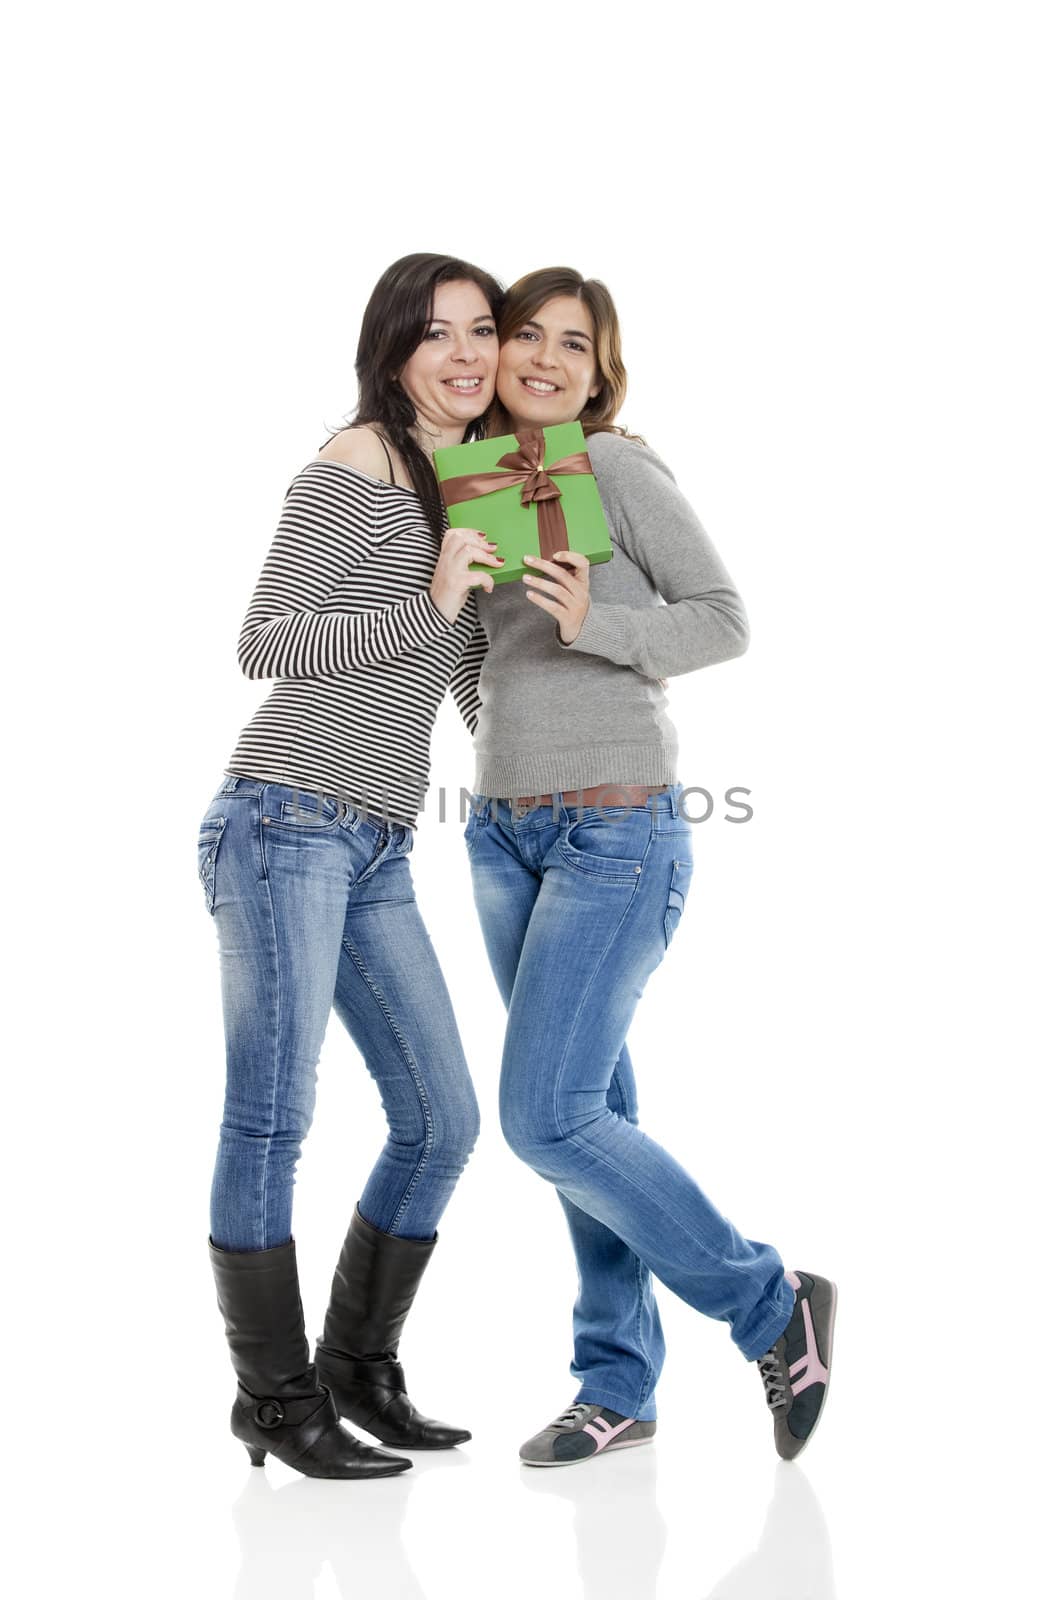 Young Women�s holding a present
 by Iko